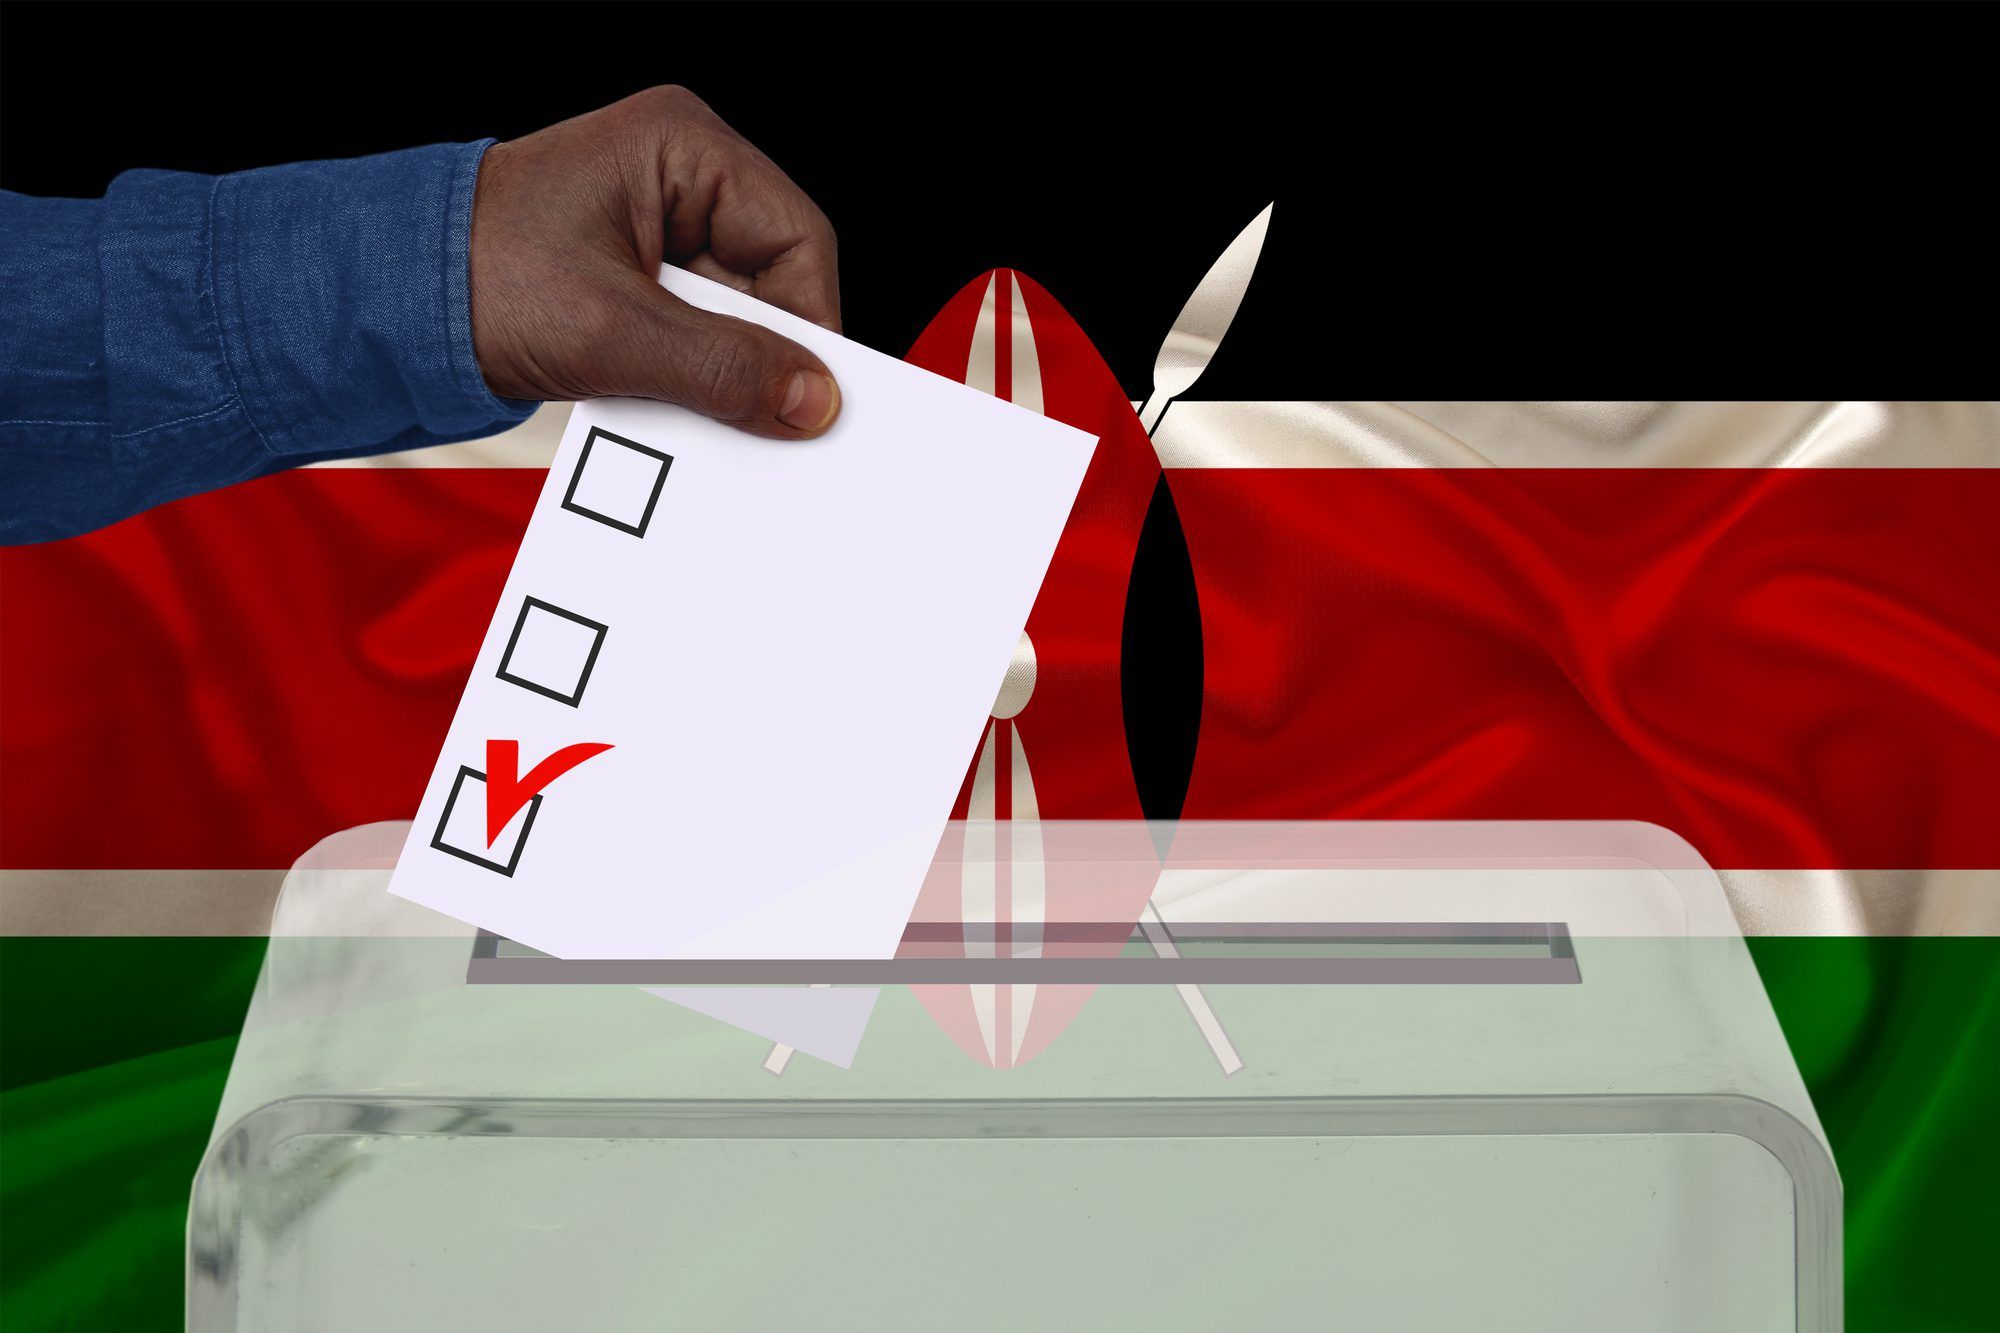 Male voter drops a ballot in a transparent ballot box against the background of the Kenya national flag